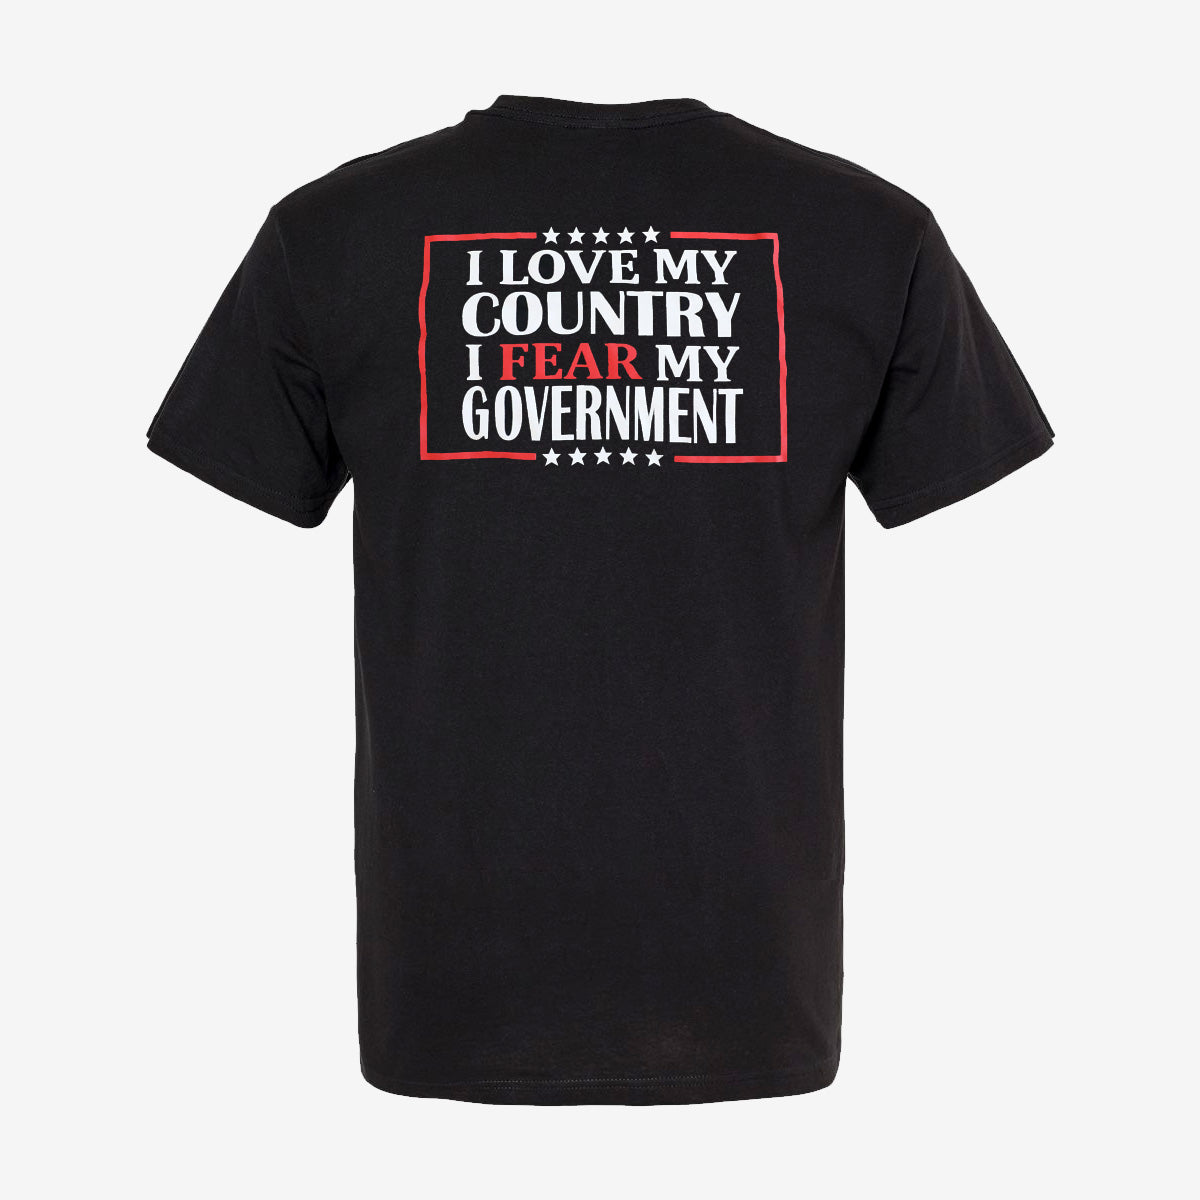 Love My Country Fear My Government T-Shirt